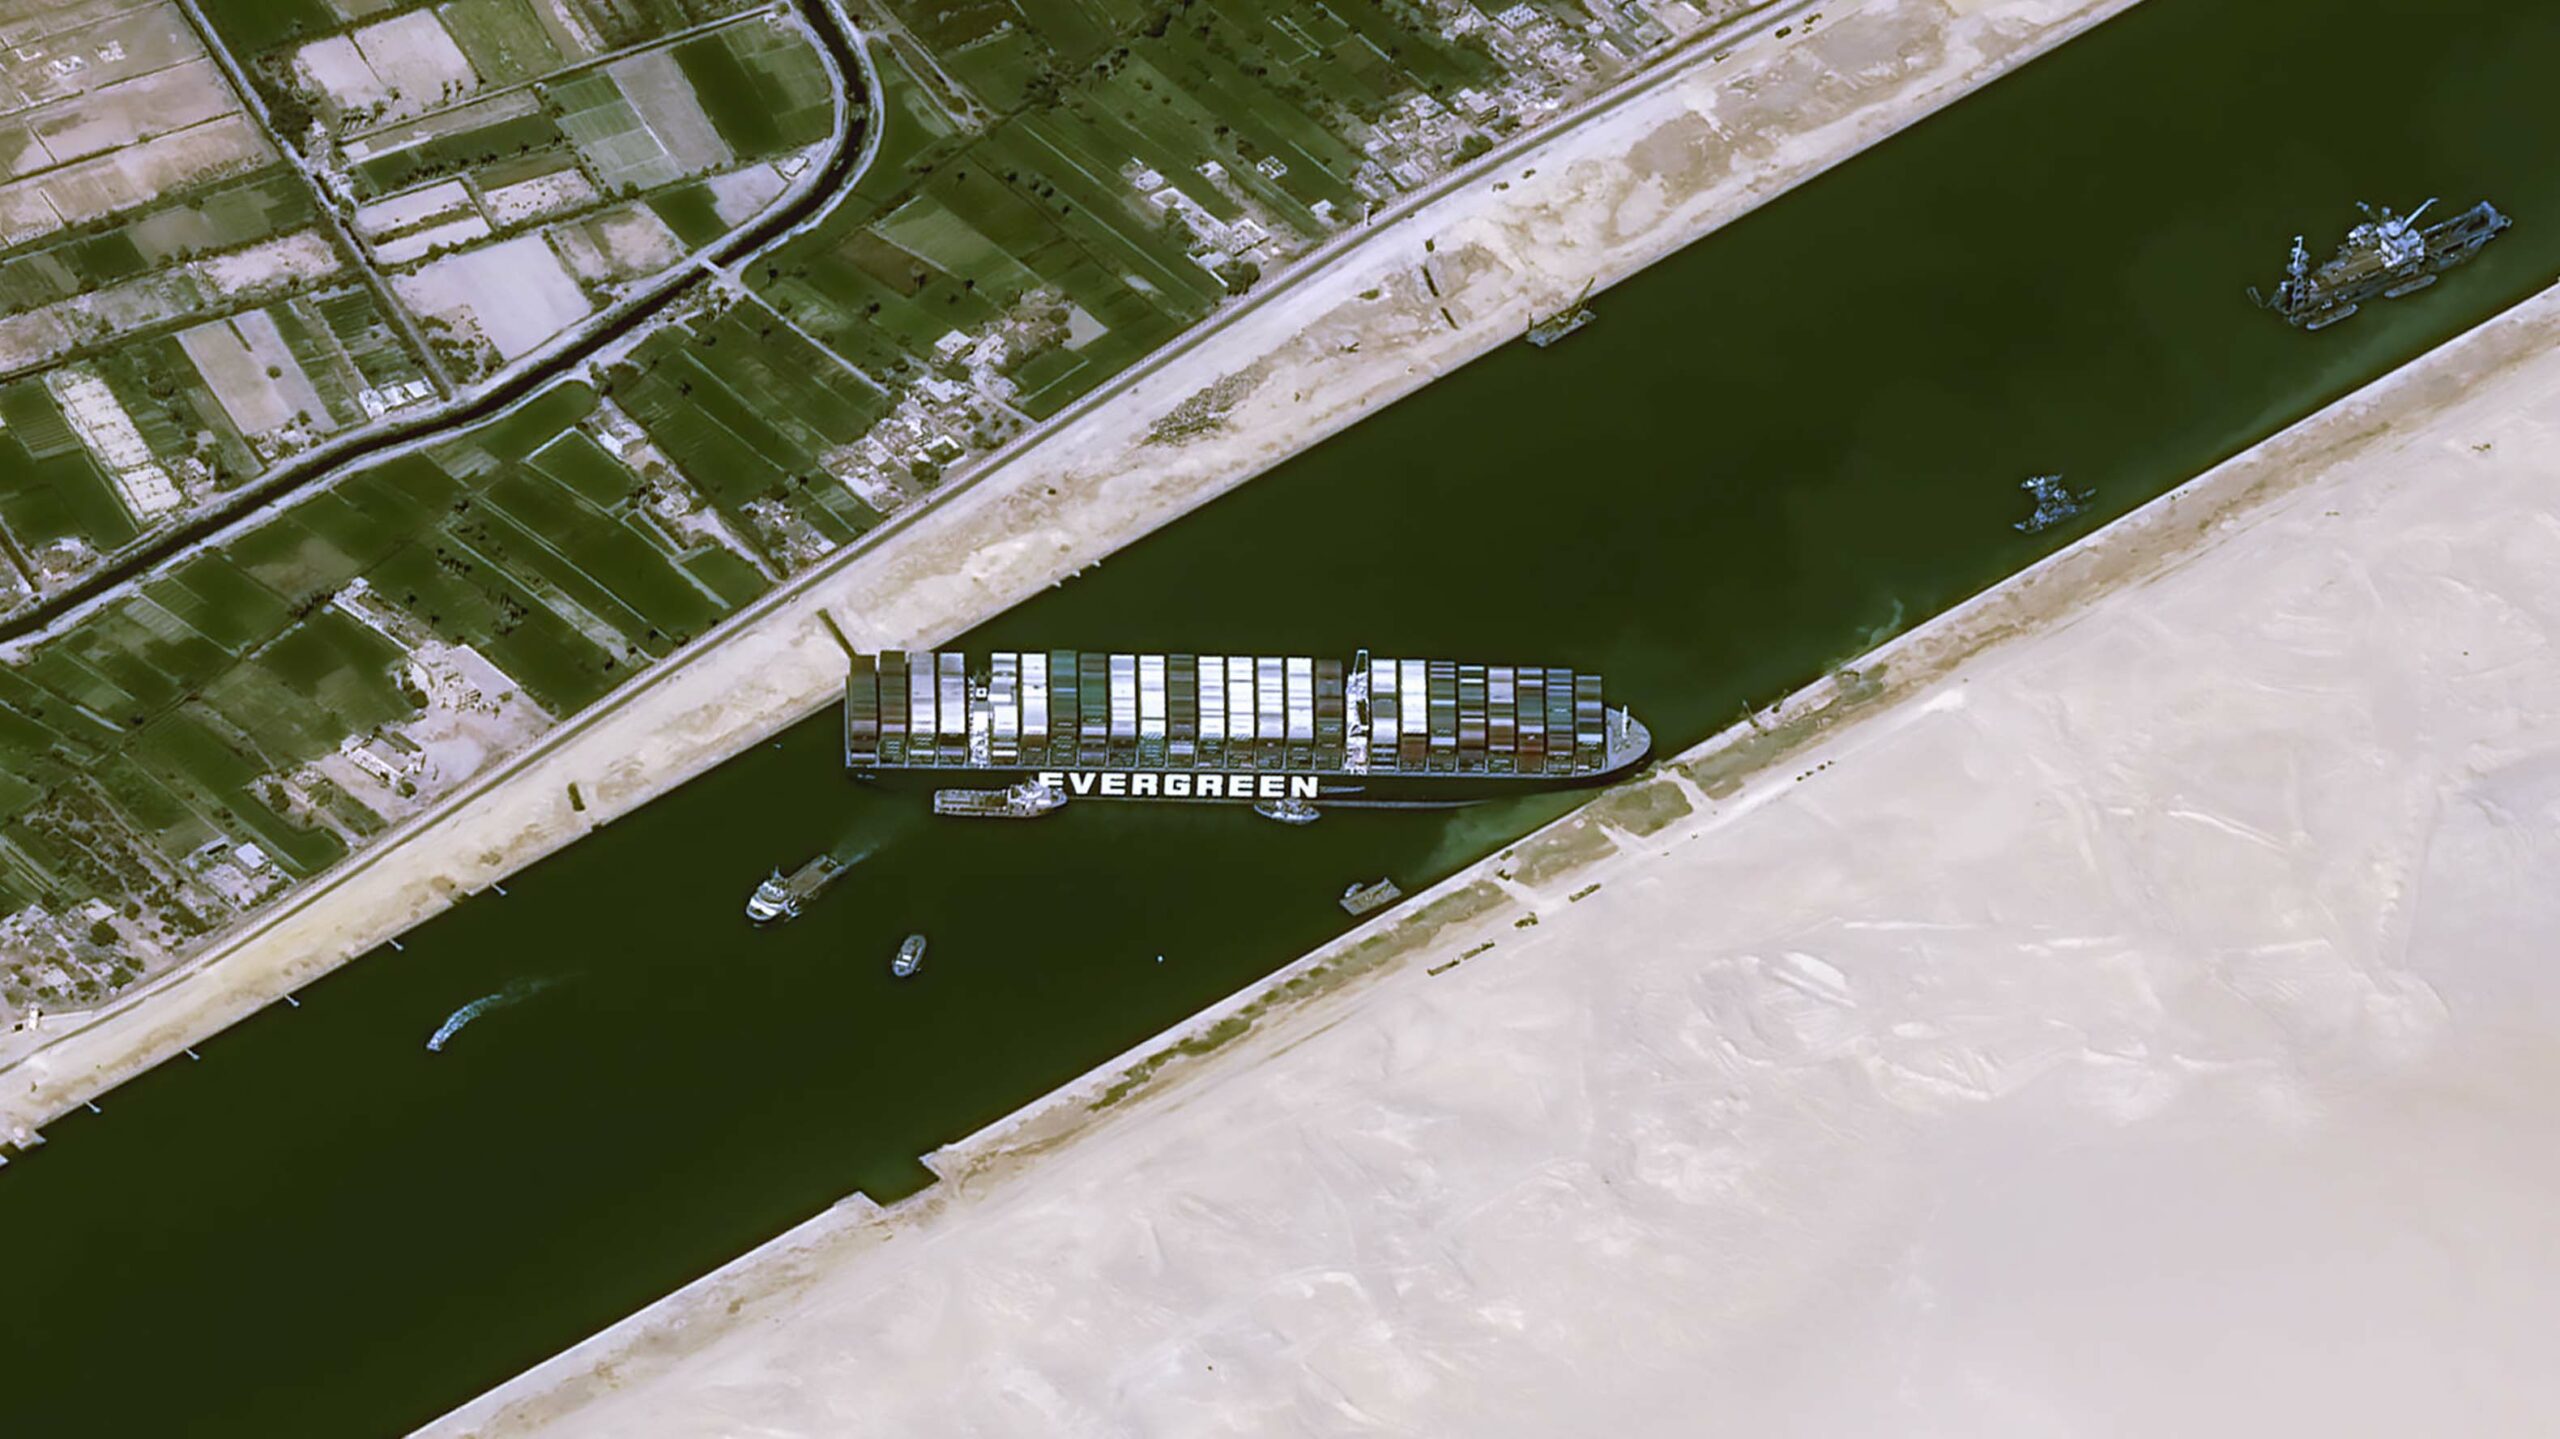 Satellite image of the Ever Given stuck in the Suez Canal